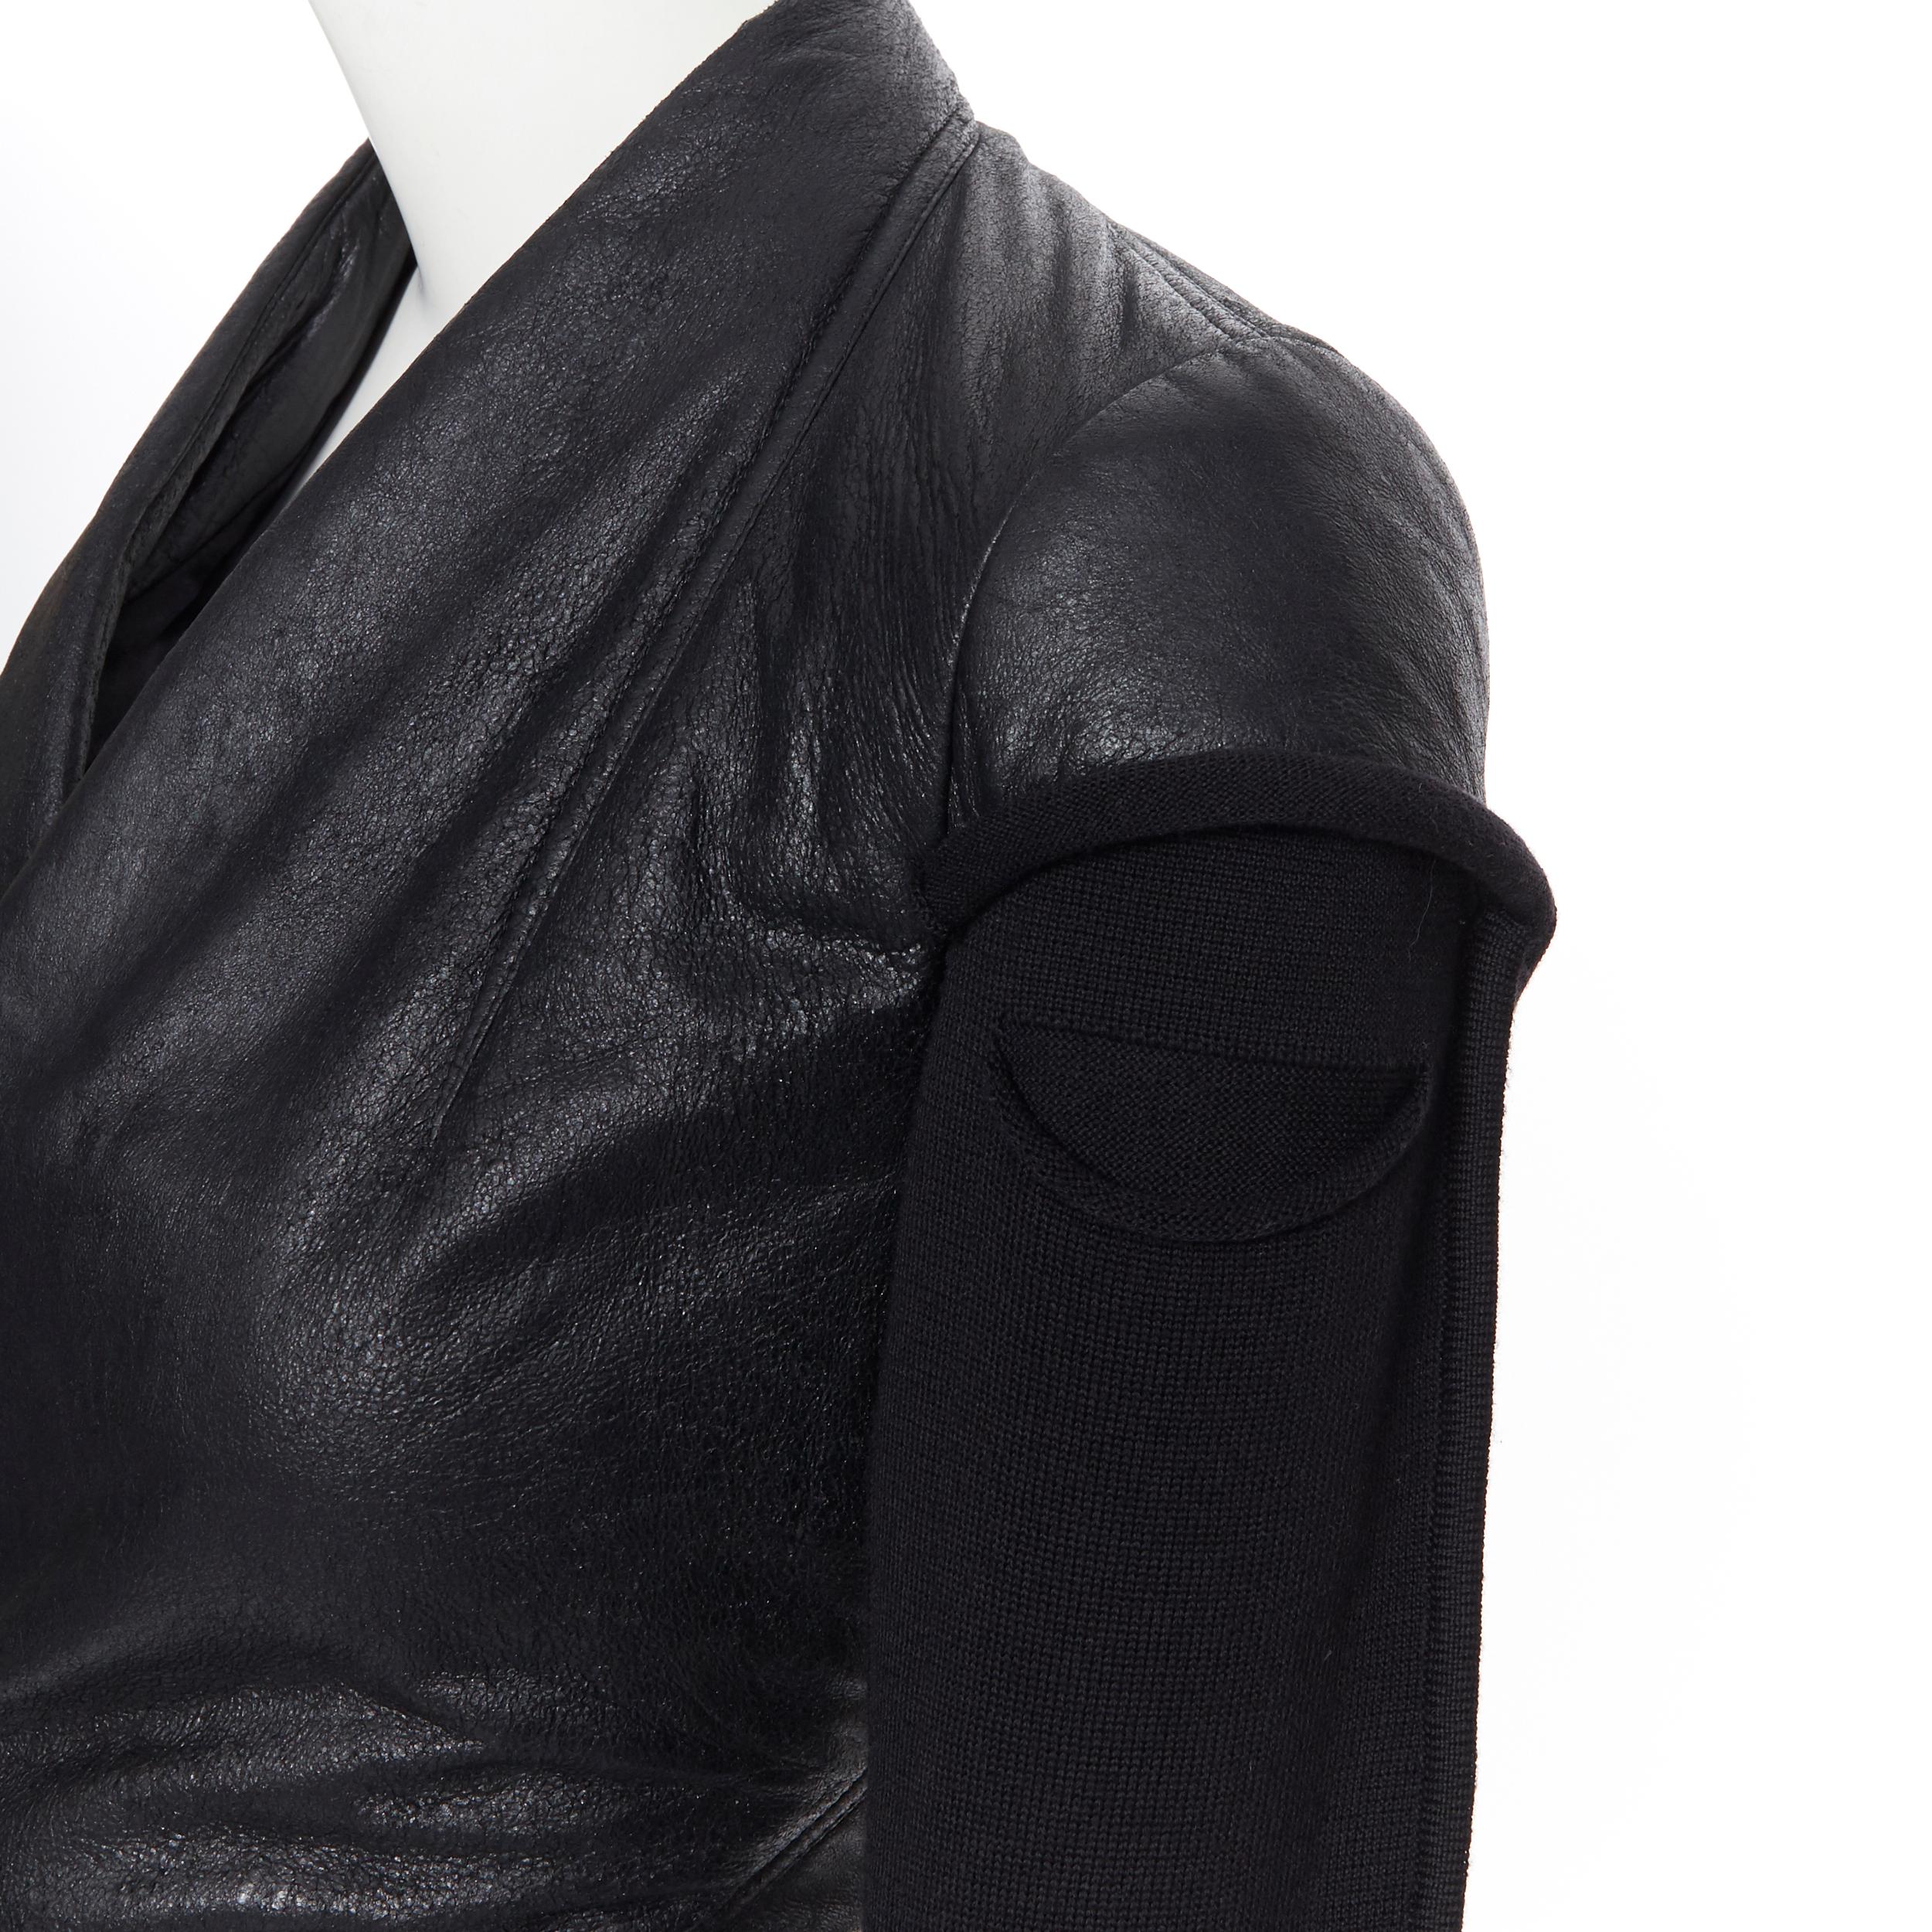 new RICK OWENS AW18 Sisyphus Wrap Princess black leather wool sleeves jacket XS
Brand: Rick Owens
Designer: Rick Owens
Collection: AW18
Model Name / Style: Wrap Princess
Material: Leather, wool
Color: Black
Pattern: Solid
Closure: Tie
Extra Detail: